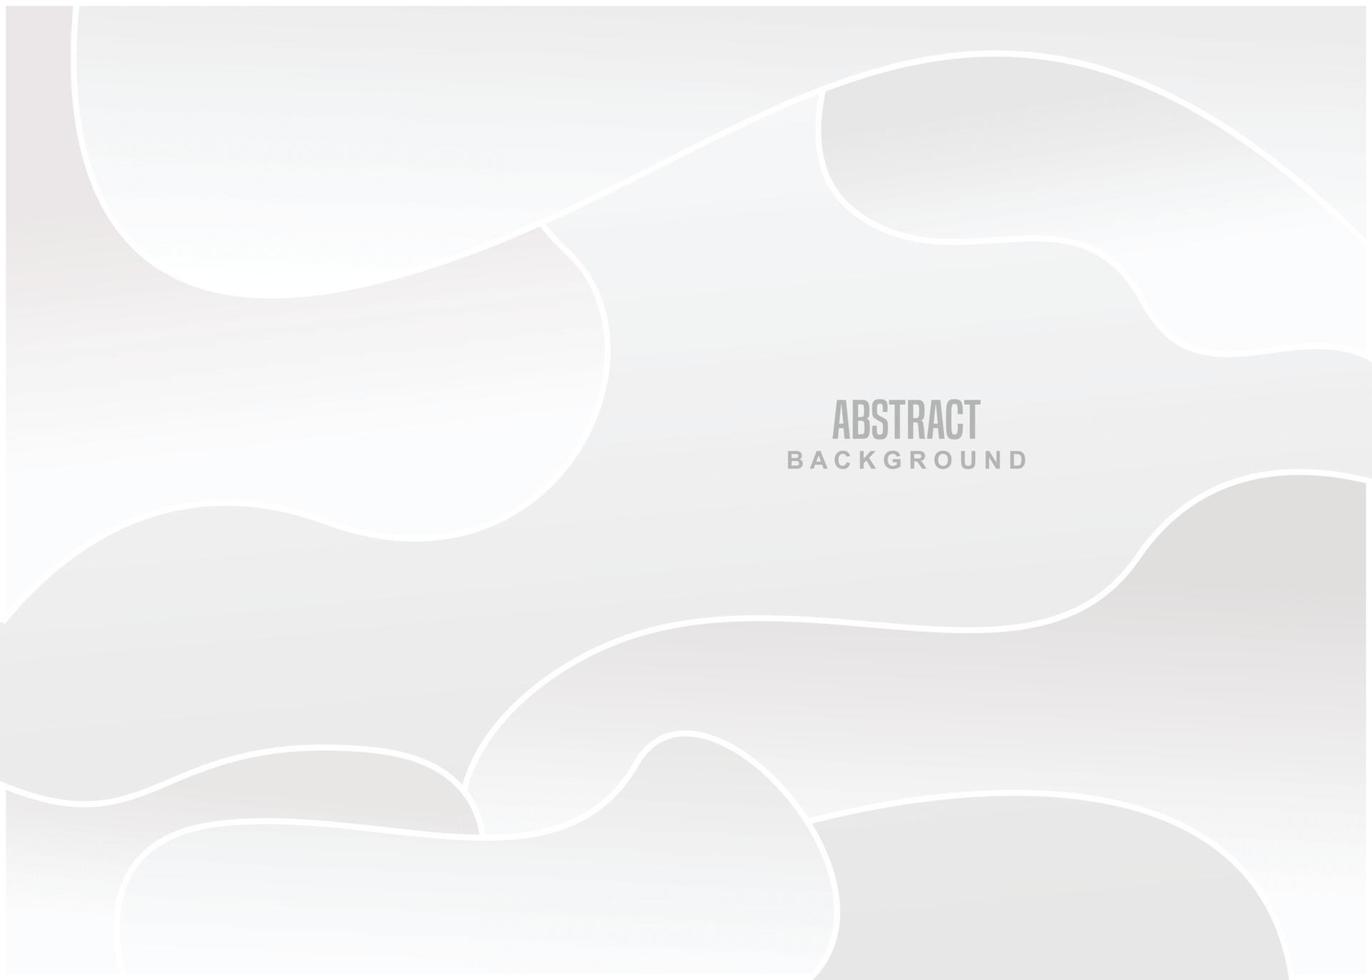 Shining white and gray background waving modern minimalist curvy style vector